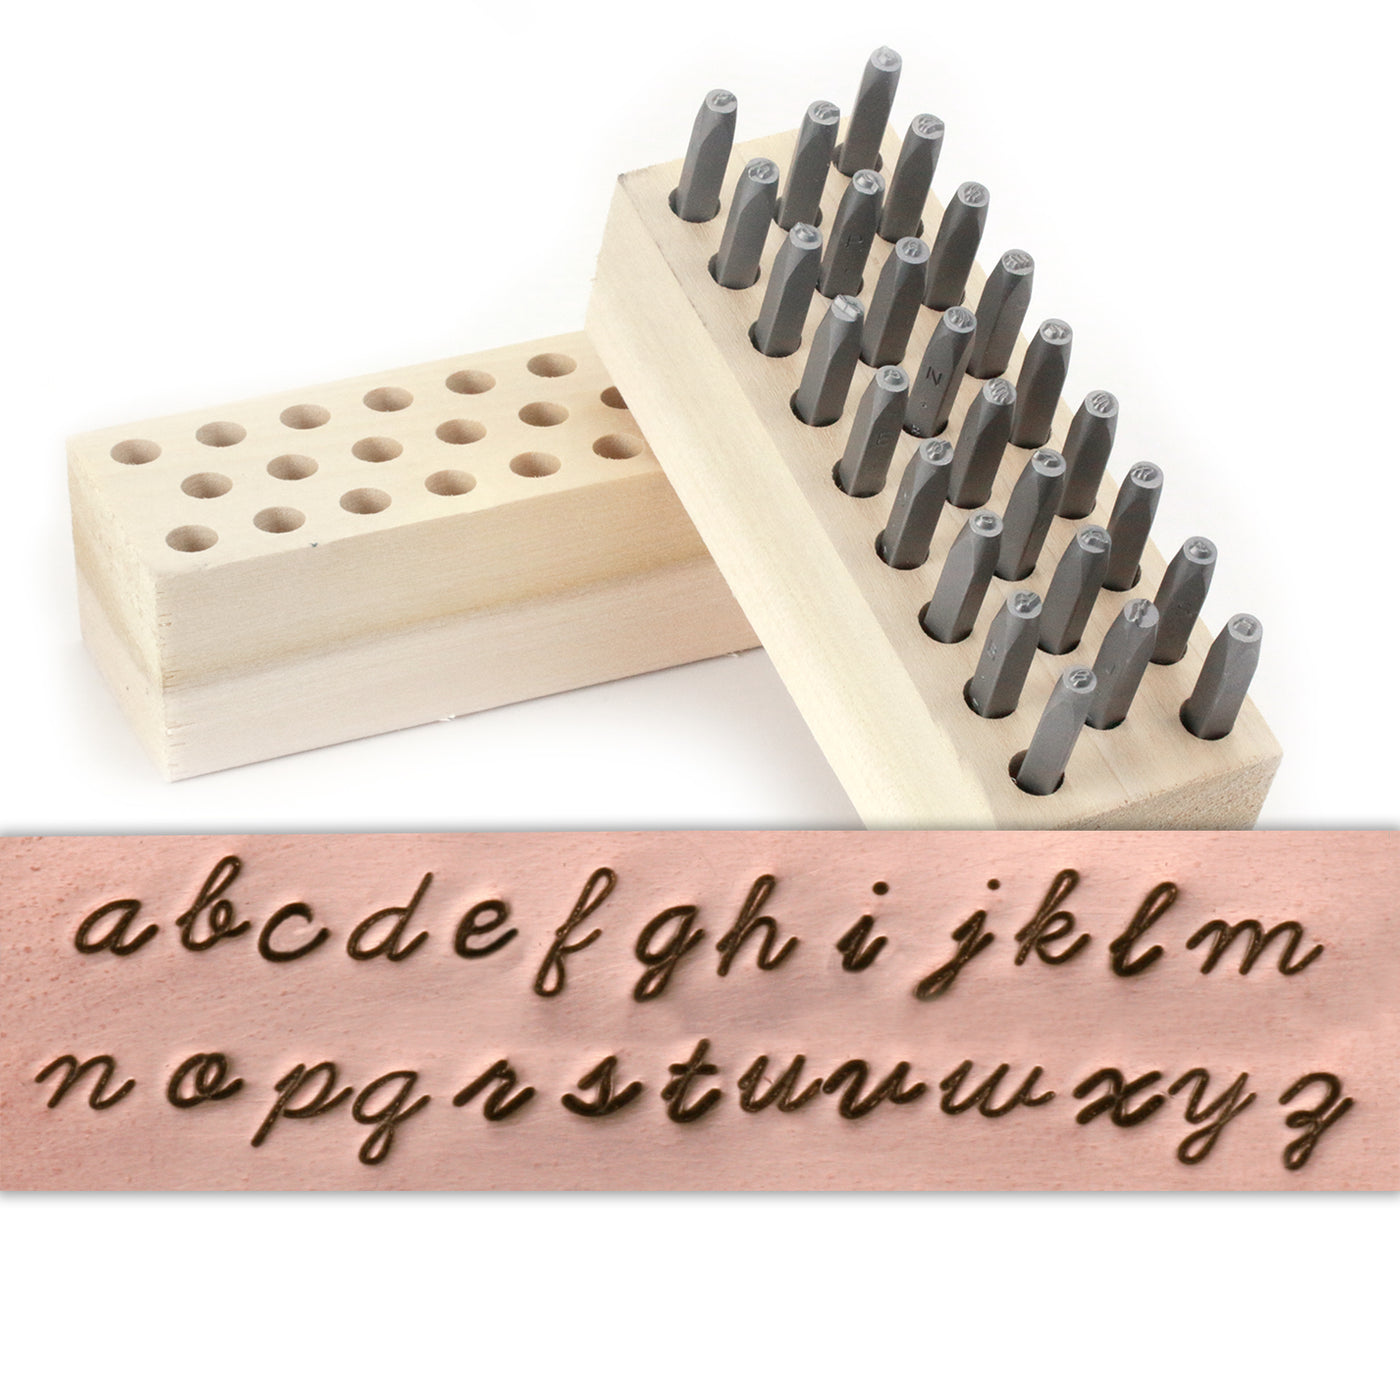 Beaducation Script Lowercase Letter Stamp Set 1/8 (3.2mm)